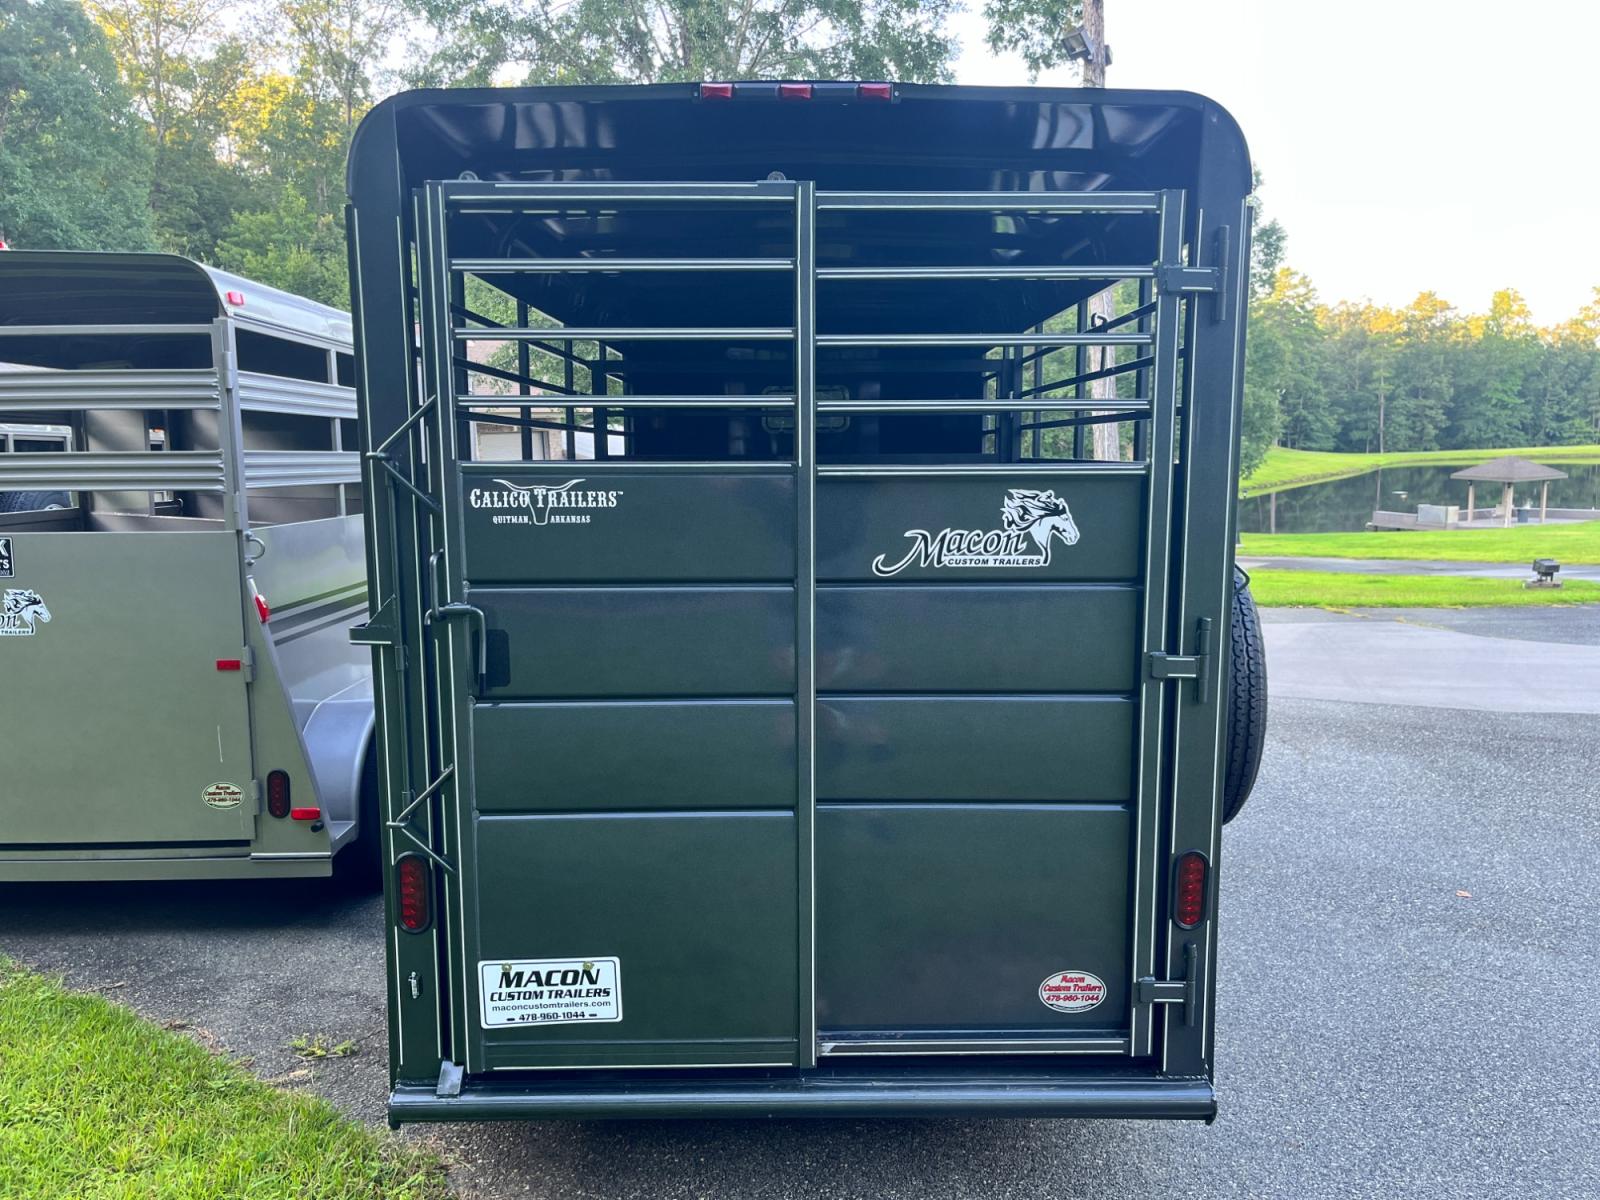 2023 Charcoal Metallic /Charcoal Calico 6ft X 16ft Livestock Trailer , located at 1330 Rainey Rd., Macon, 31220, (478) 960-1044, 32.845638, -83.778687 - Sold! Brand New 2023 Horse & Livestock Trailer 6.5ft Tall Made by Calico Trailers, in Arkansas Haul Small Horses in Style, Multiple Cows or Goats!! 6.5ft Tall Interior Height for Hauling Small Horses, Cows, Goats, Pigs, Sheep, Whatever! 6ft X 16ft is the Perfect Size. Haul All Your Animals With - Photo #6